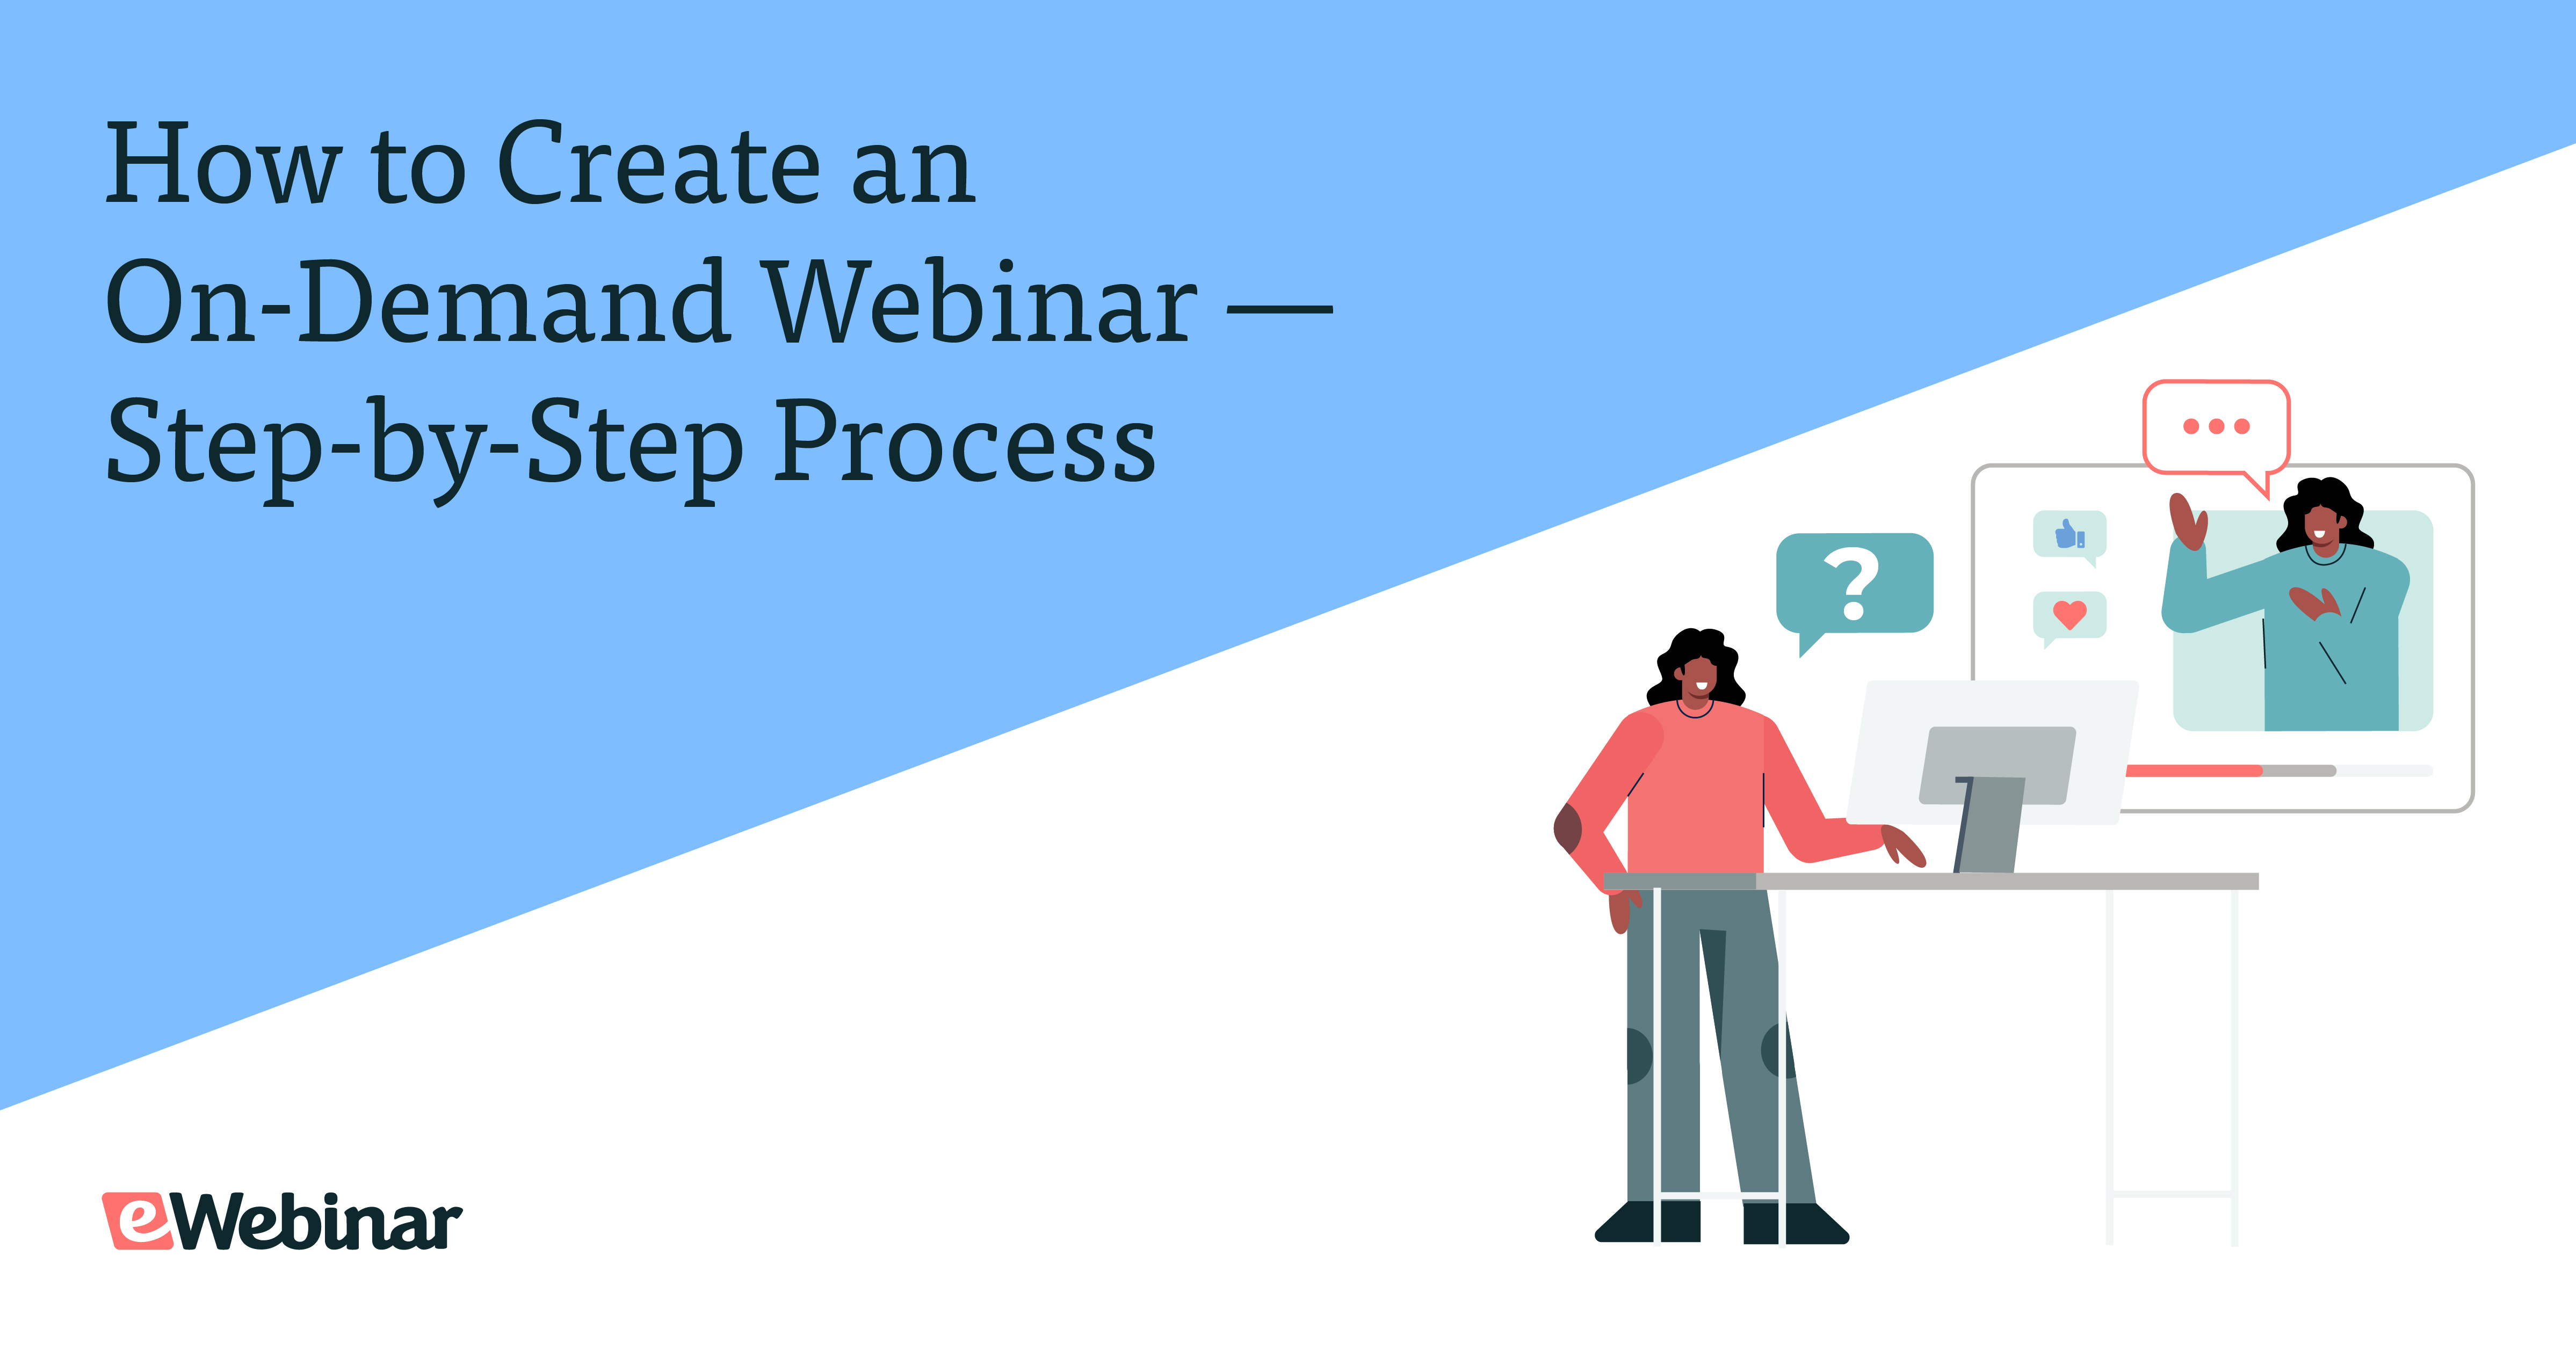 How to Create an On-Demand Webinar — Step-by-Step Process